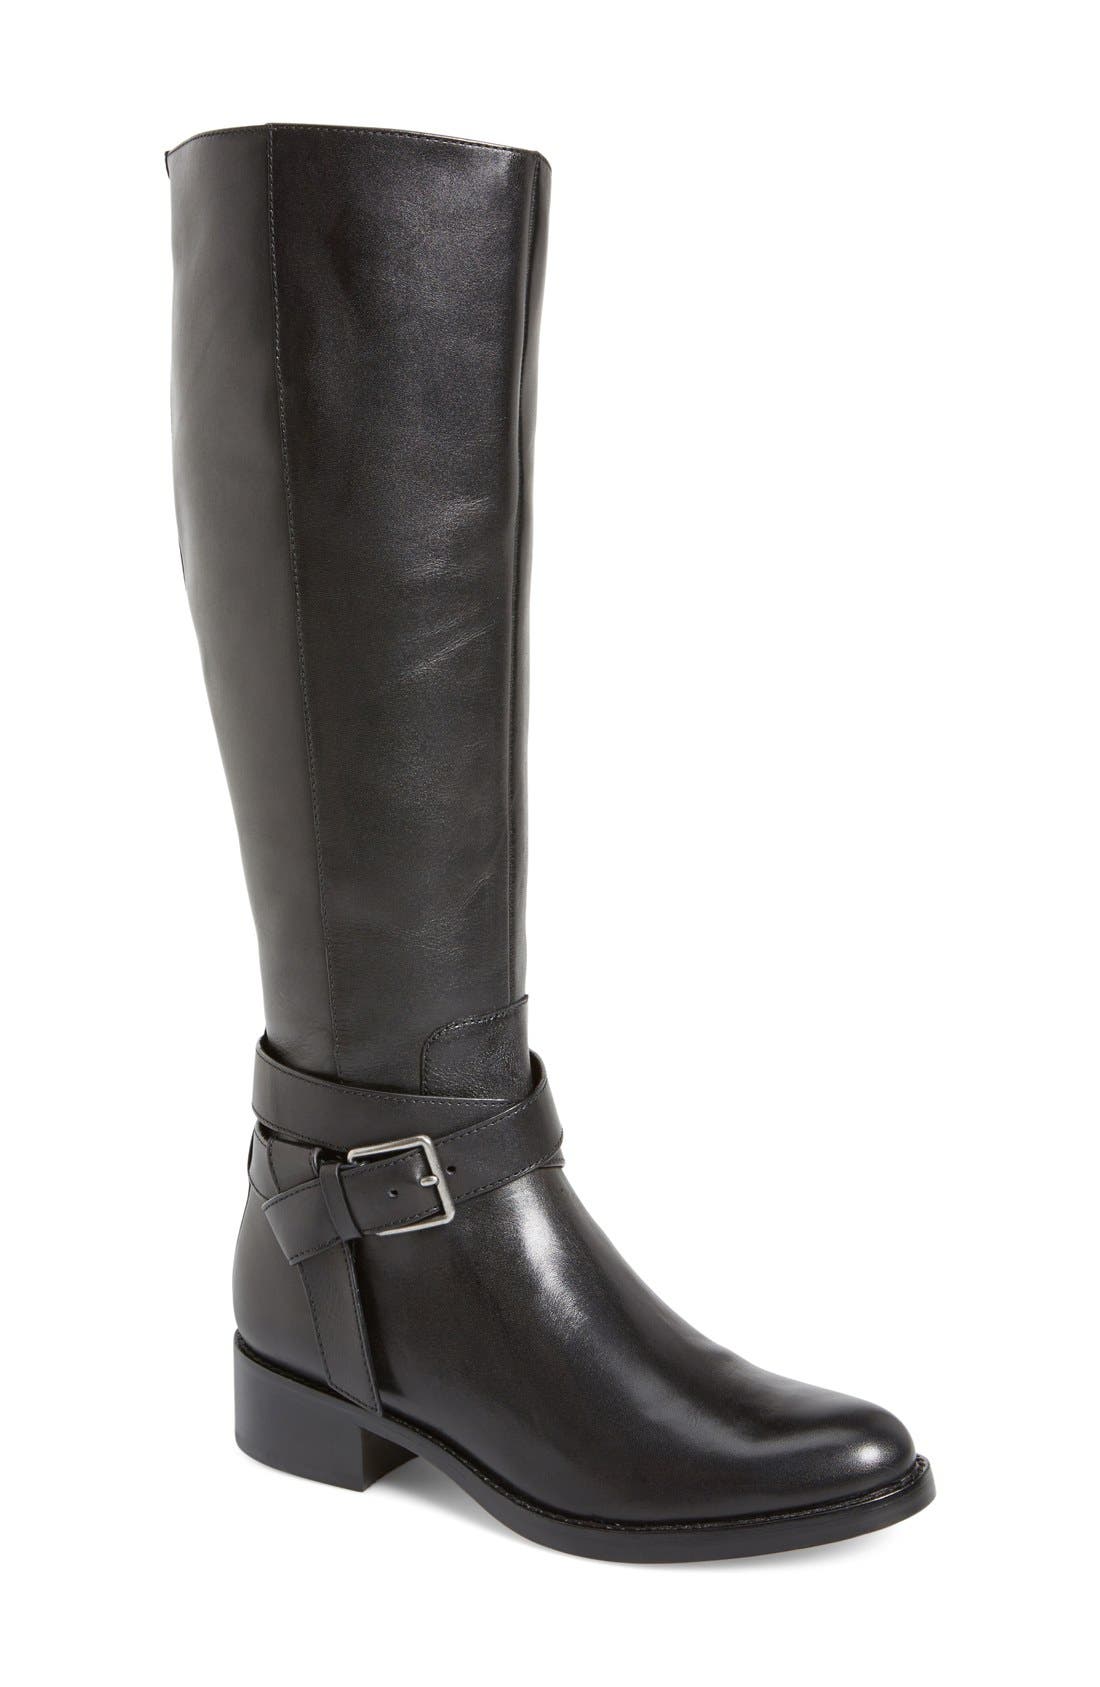 Cole Haan 'Briarcliff' Riding Boot 